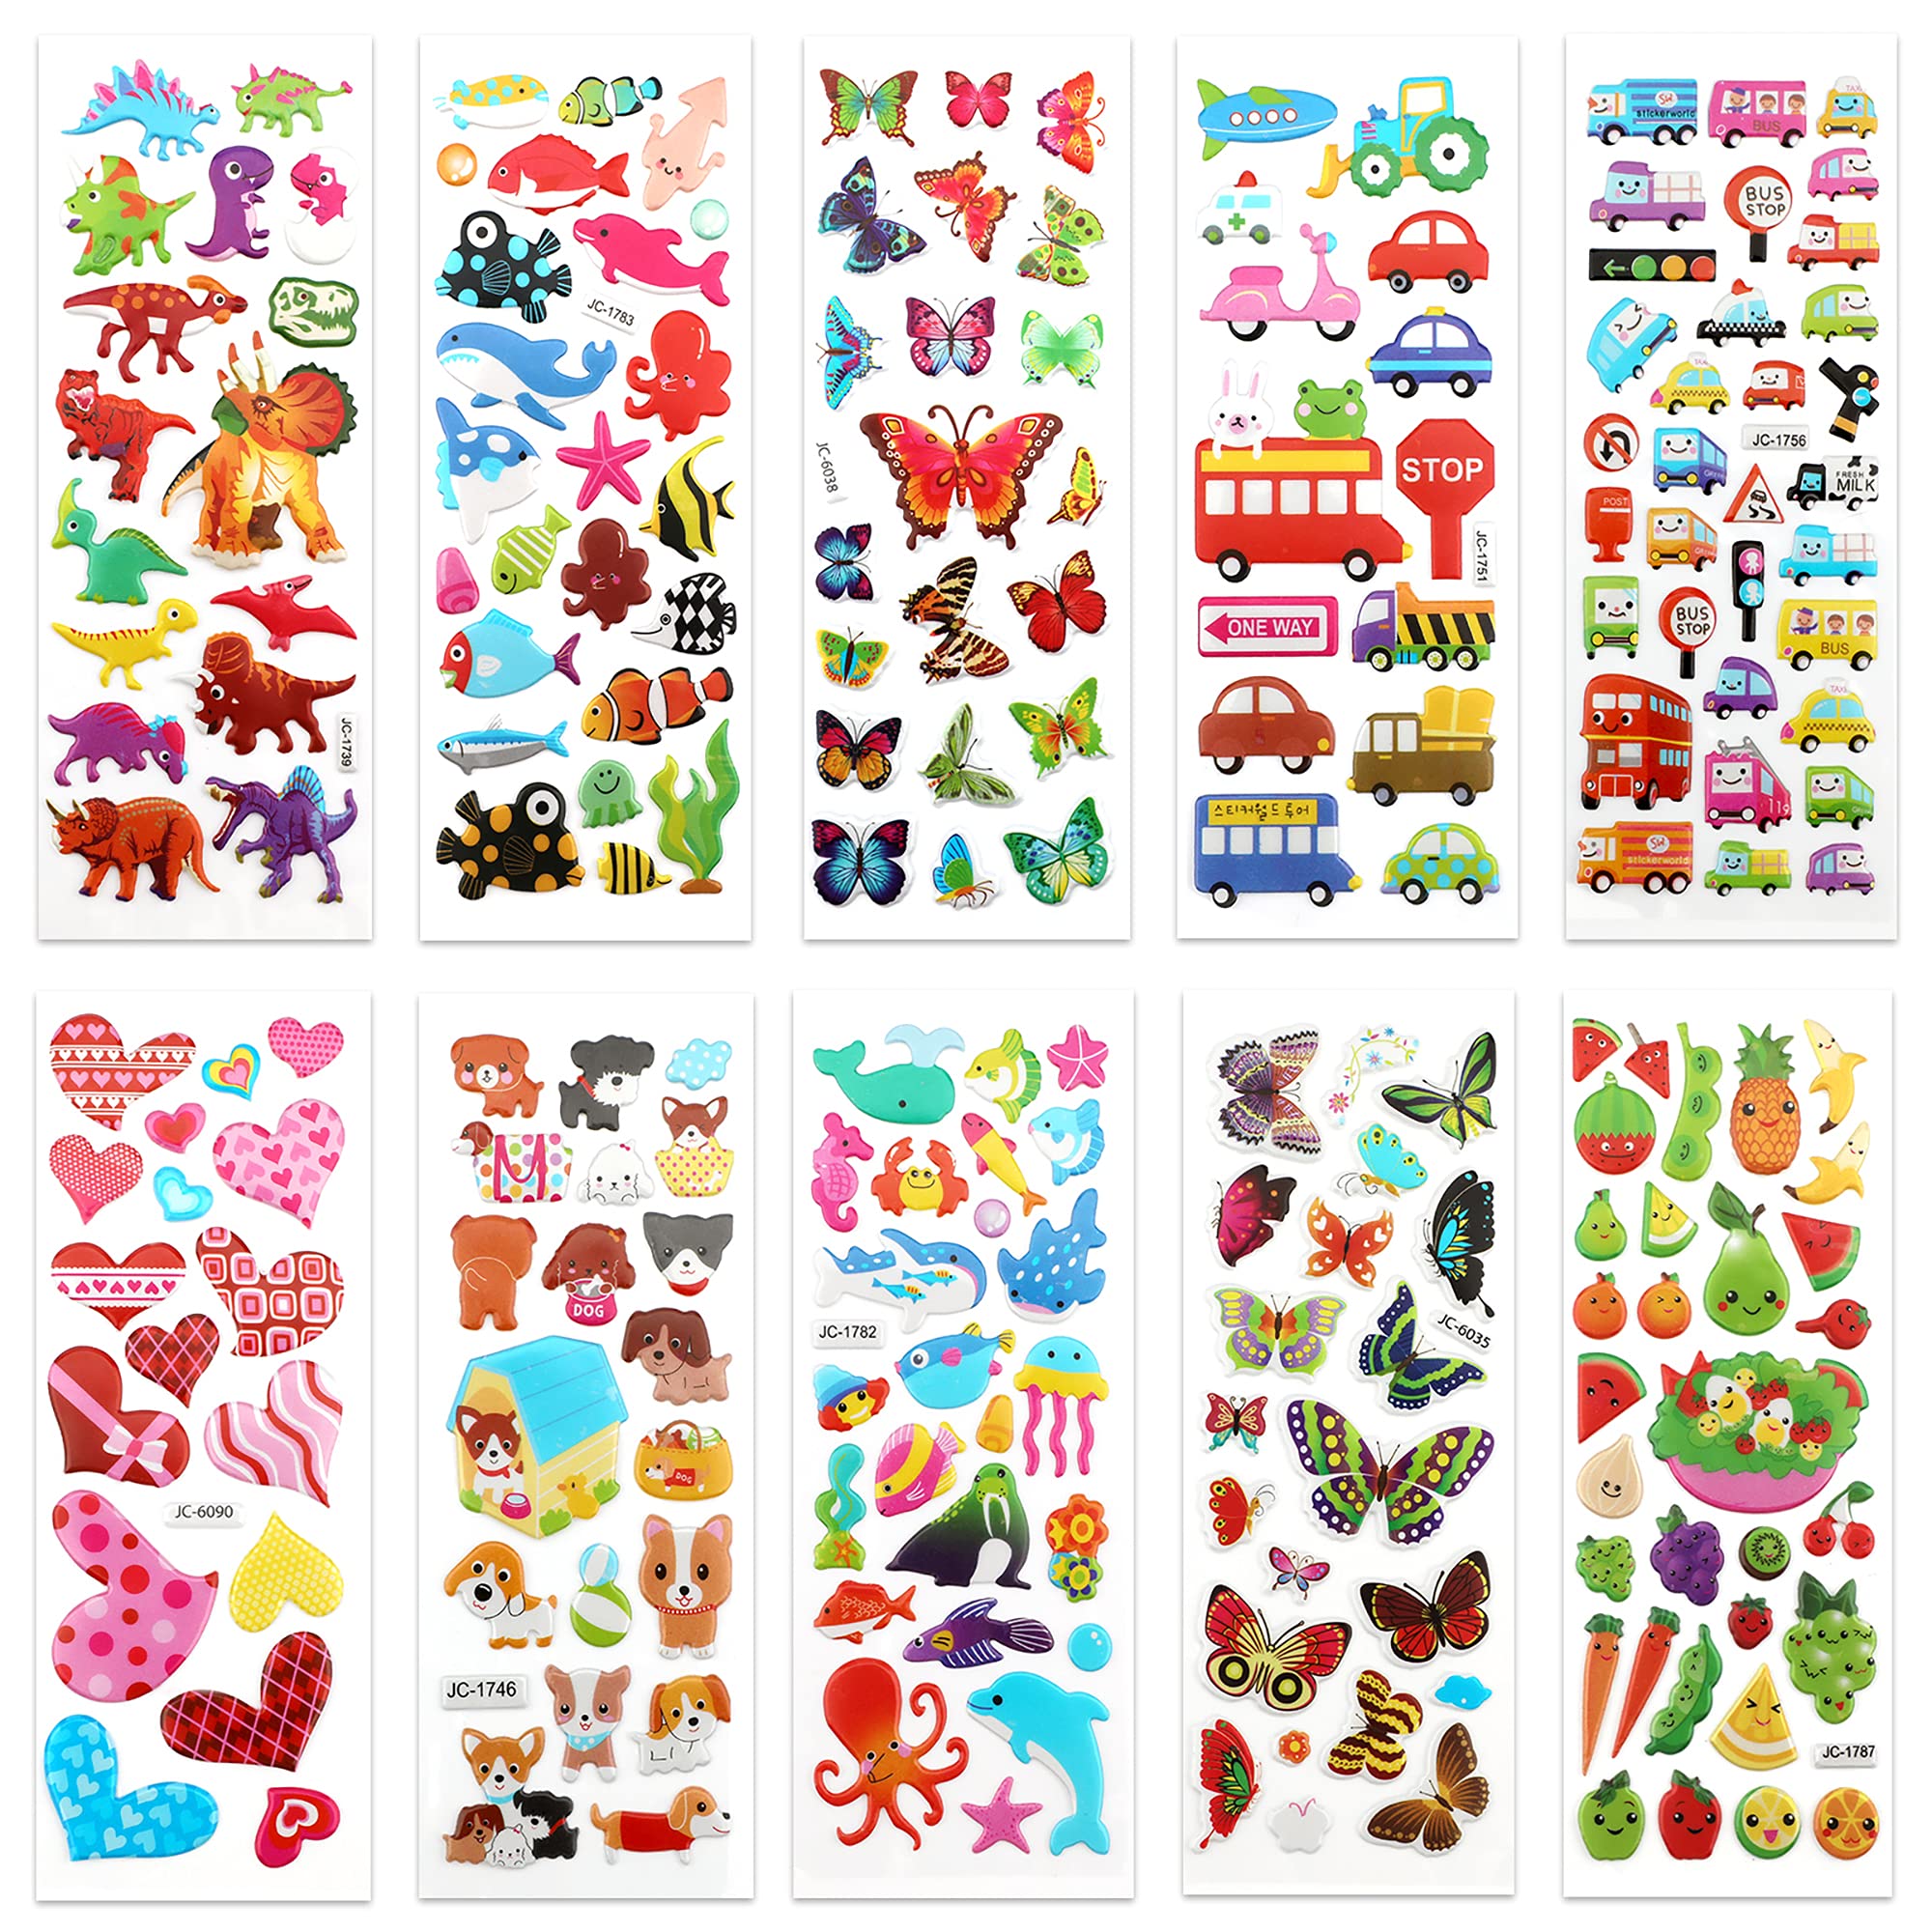 SAVITA 3D Stickers for Kids & Toddlers 500+ Puffy Stickers Variety Pack for Scrapbooking Bullet Journal Including Animal, Numbers, Fruits, Fish, Dinosaurs, Cars and More…